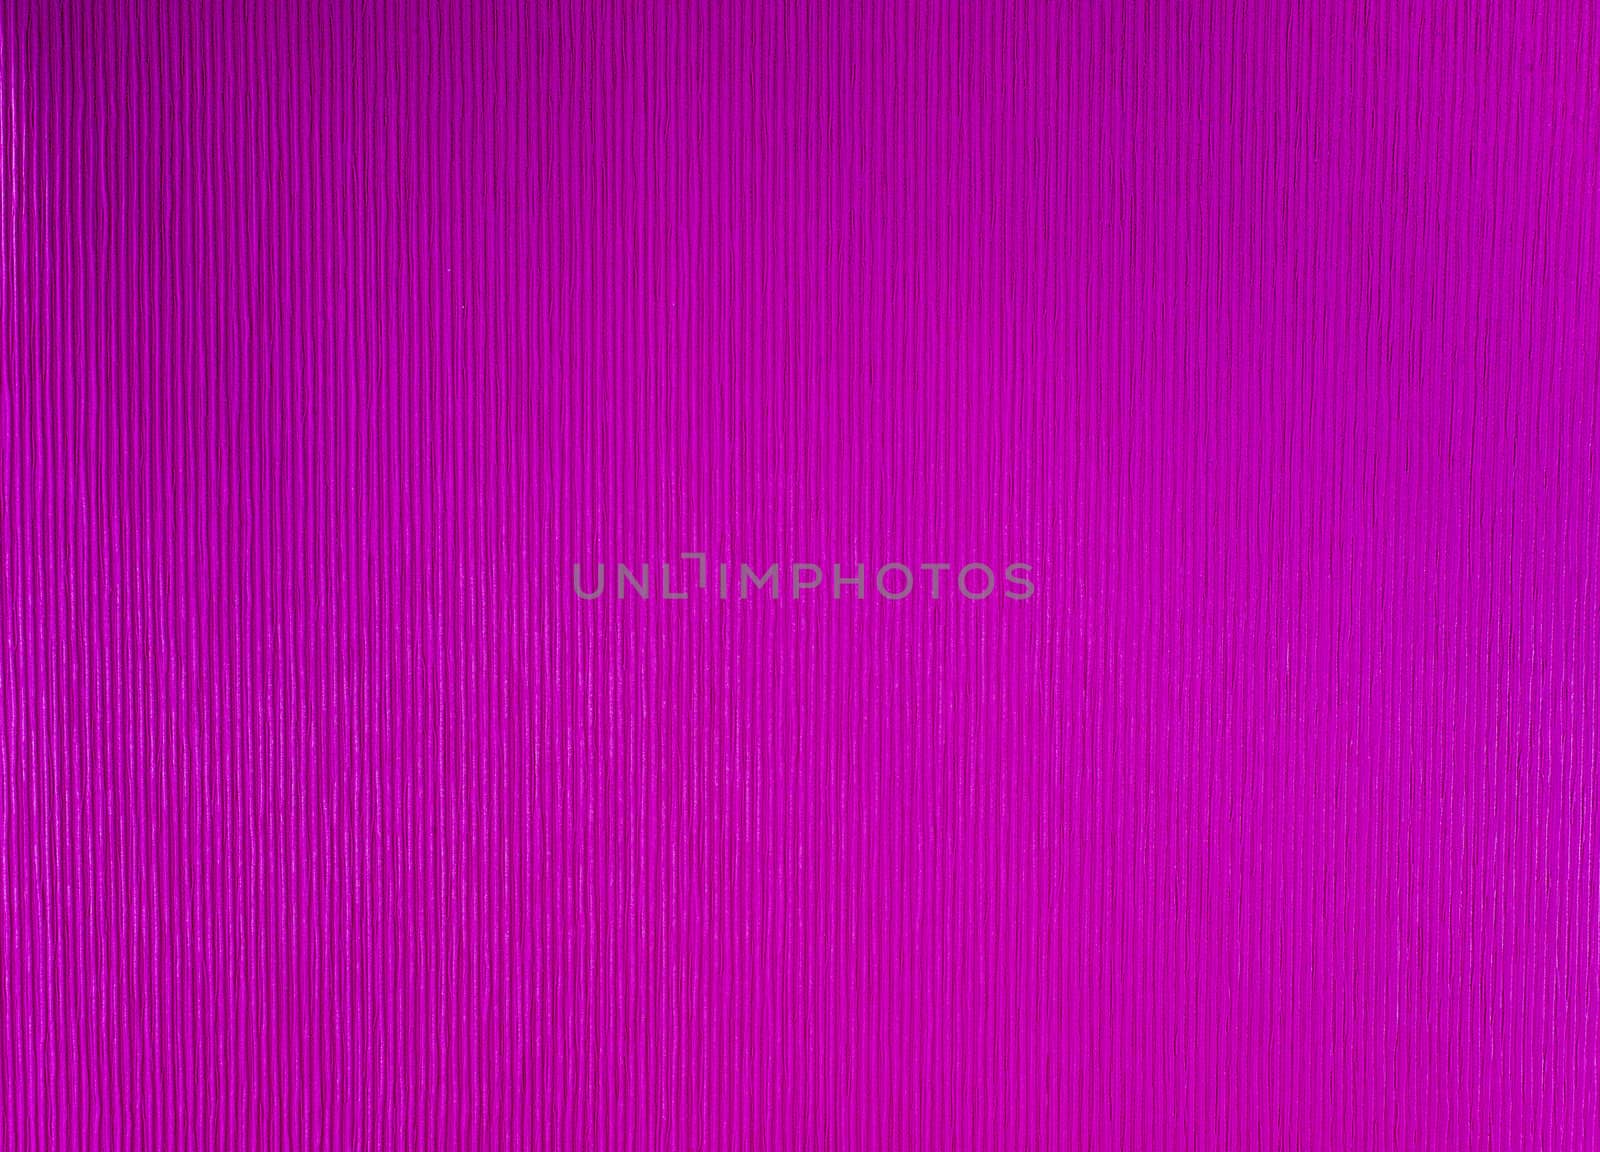 purple pink background with lines